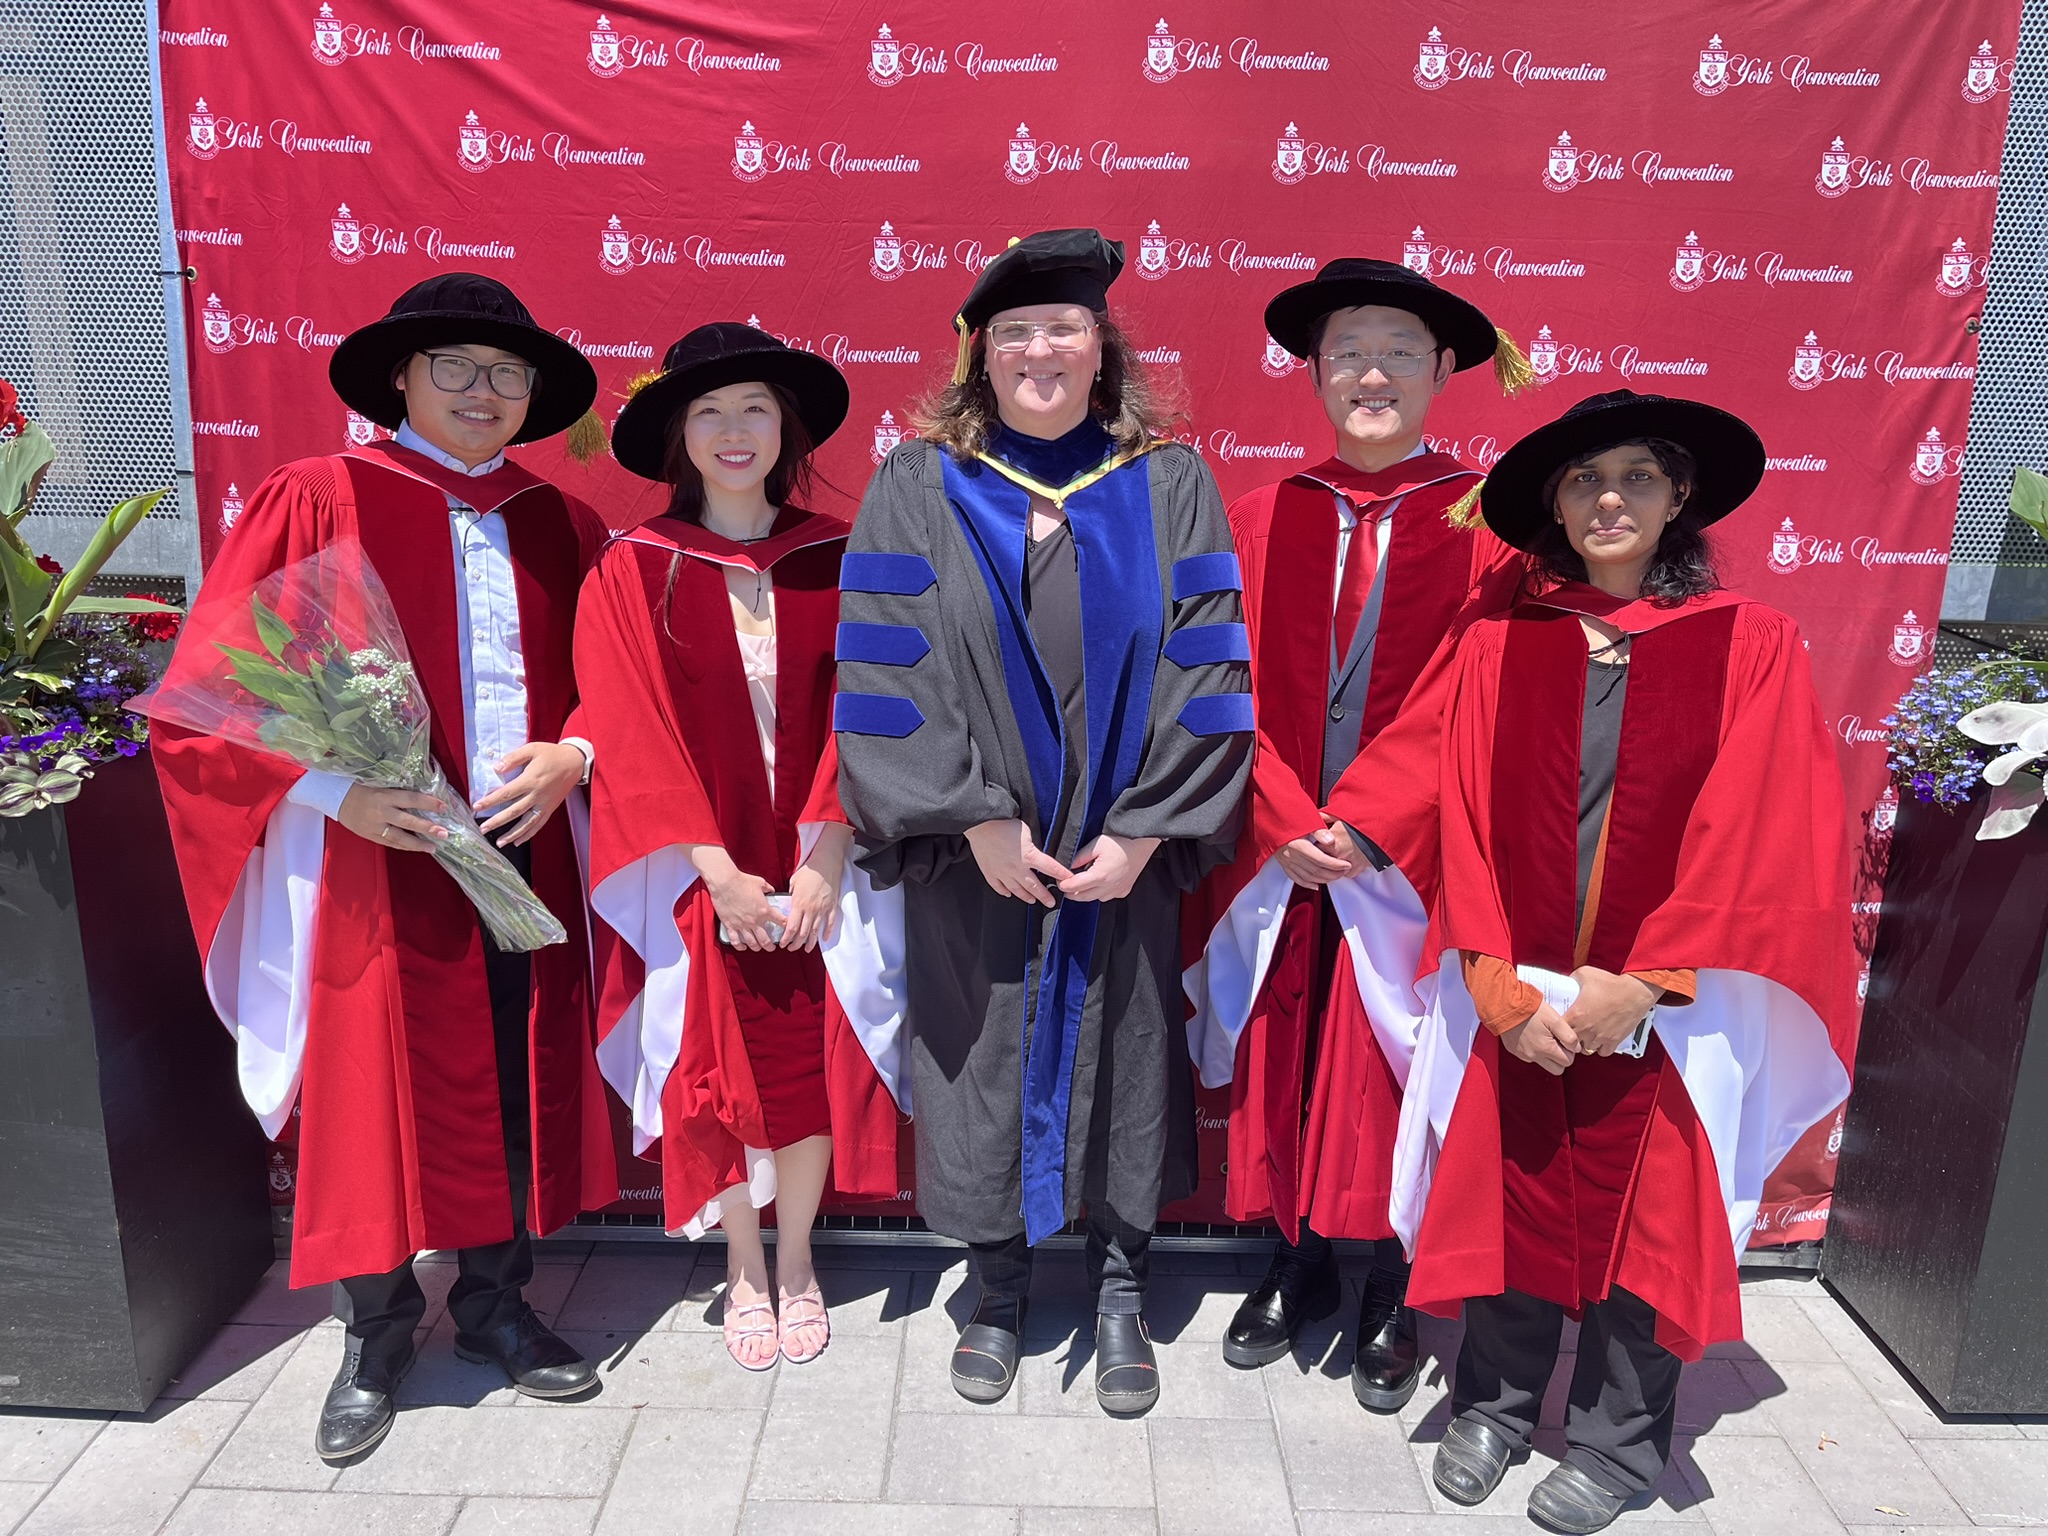 Photo of The Chair of Chemistry Dr. van Wijngaarden and 4 PhD Students at the June 2024 Convocation Ceremony